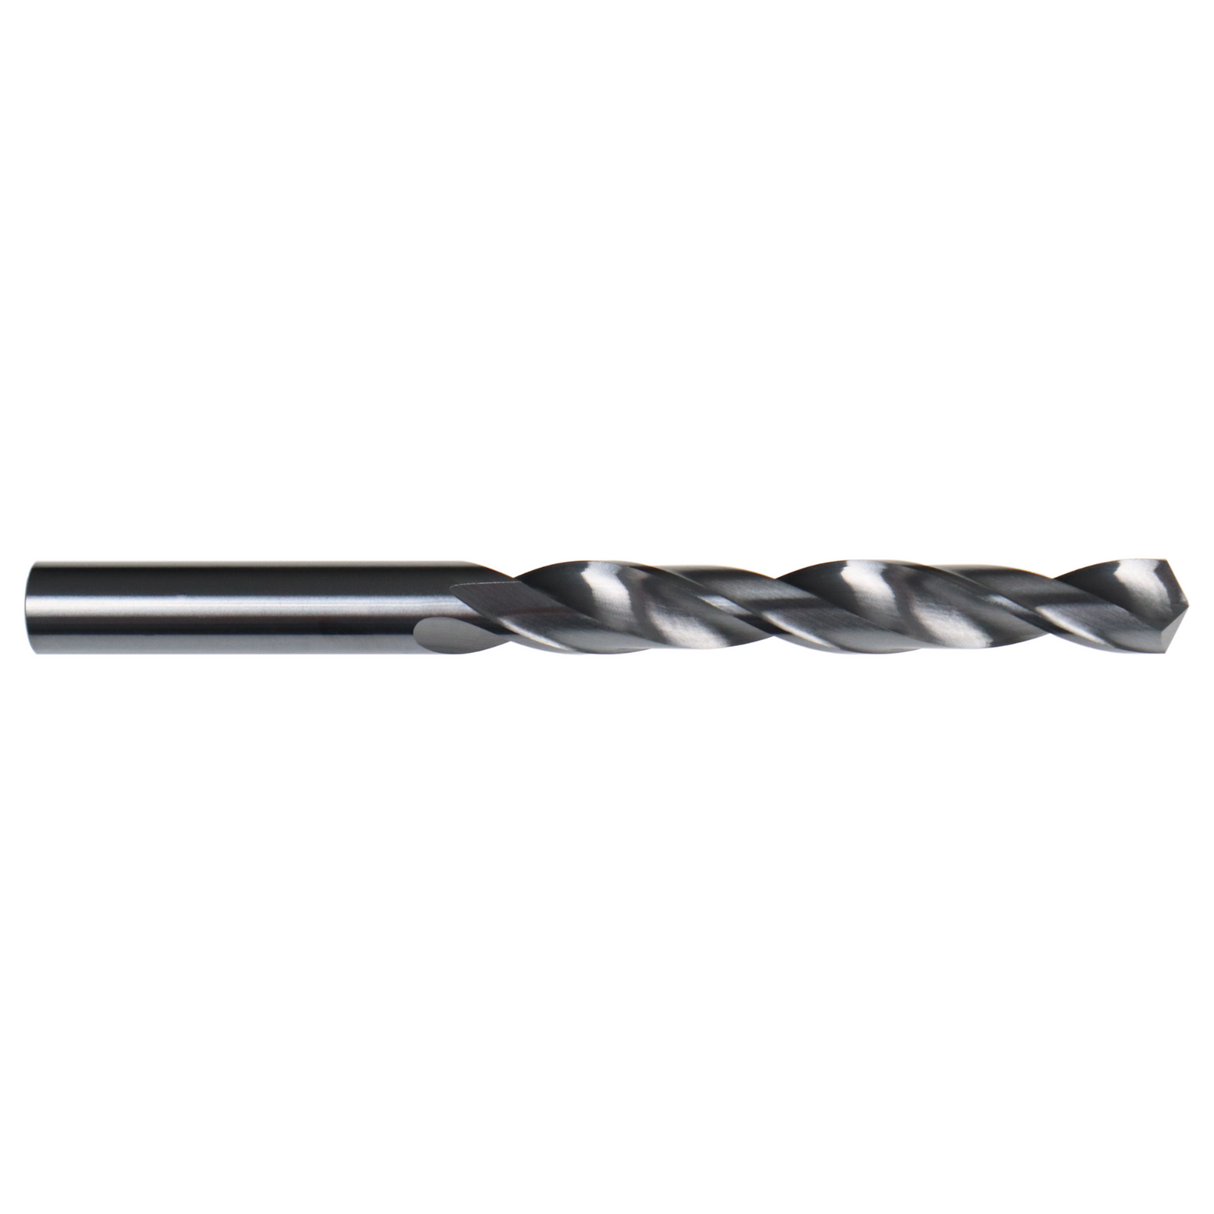 Solid carbide twist drill long Solid carbide drill - solid carbide